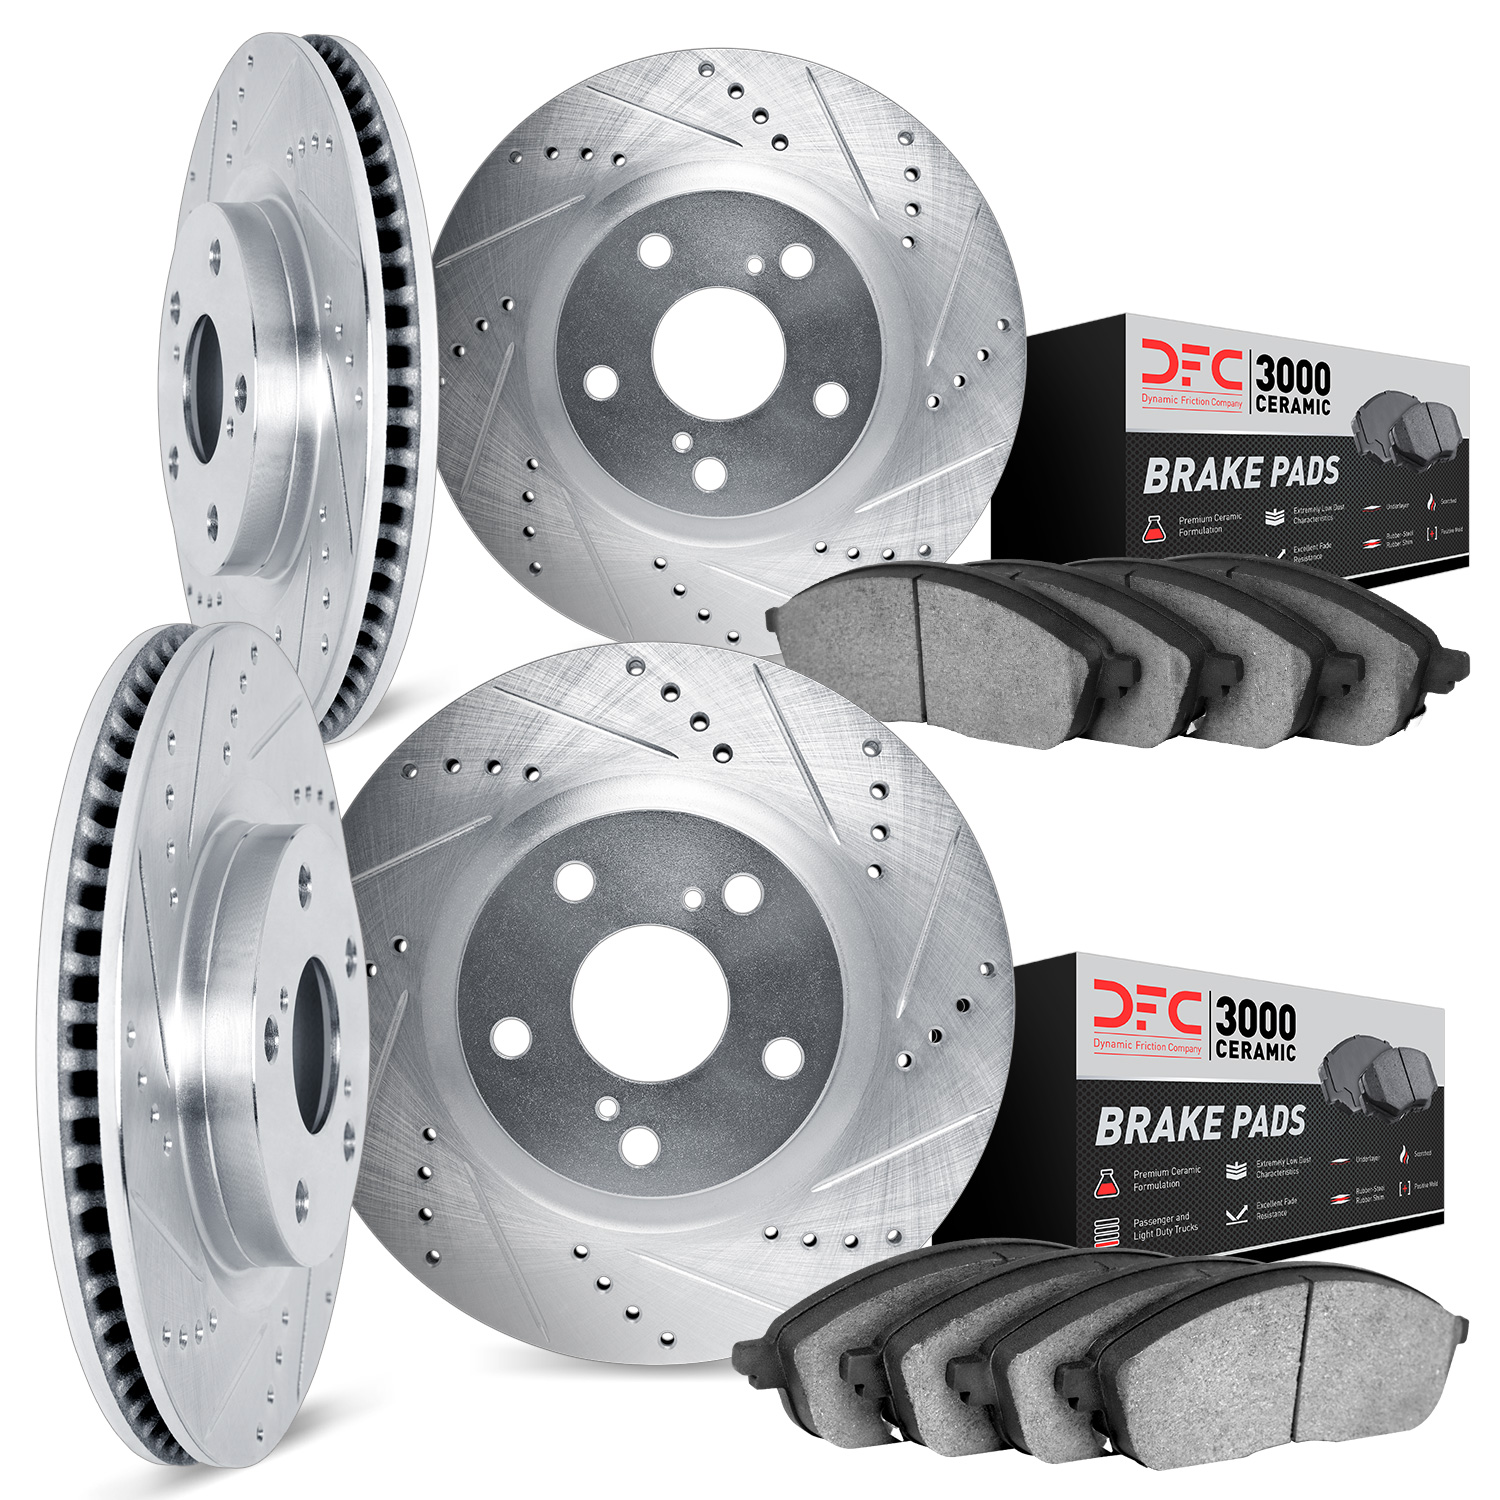 7304-75003 Drilled/Slotted Brake Rotor with 3000-Series Ceramic Brake Pads Kit [Silver], 1992-1998 Lexus/Toyota/Scion, Position: